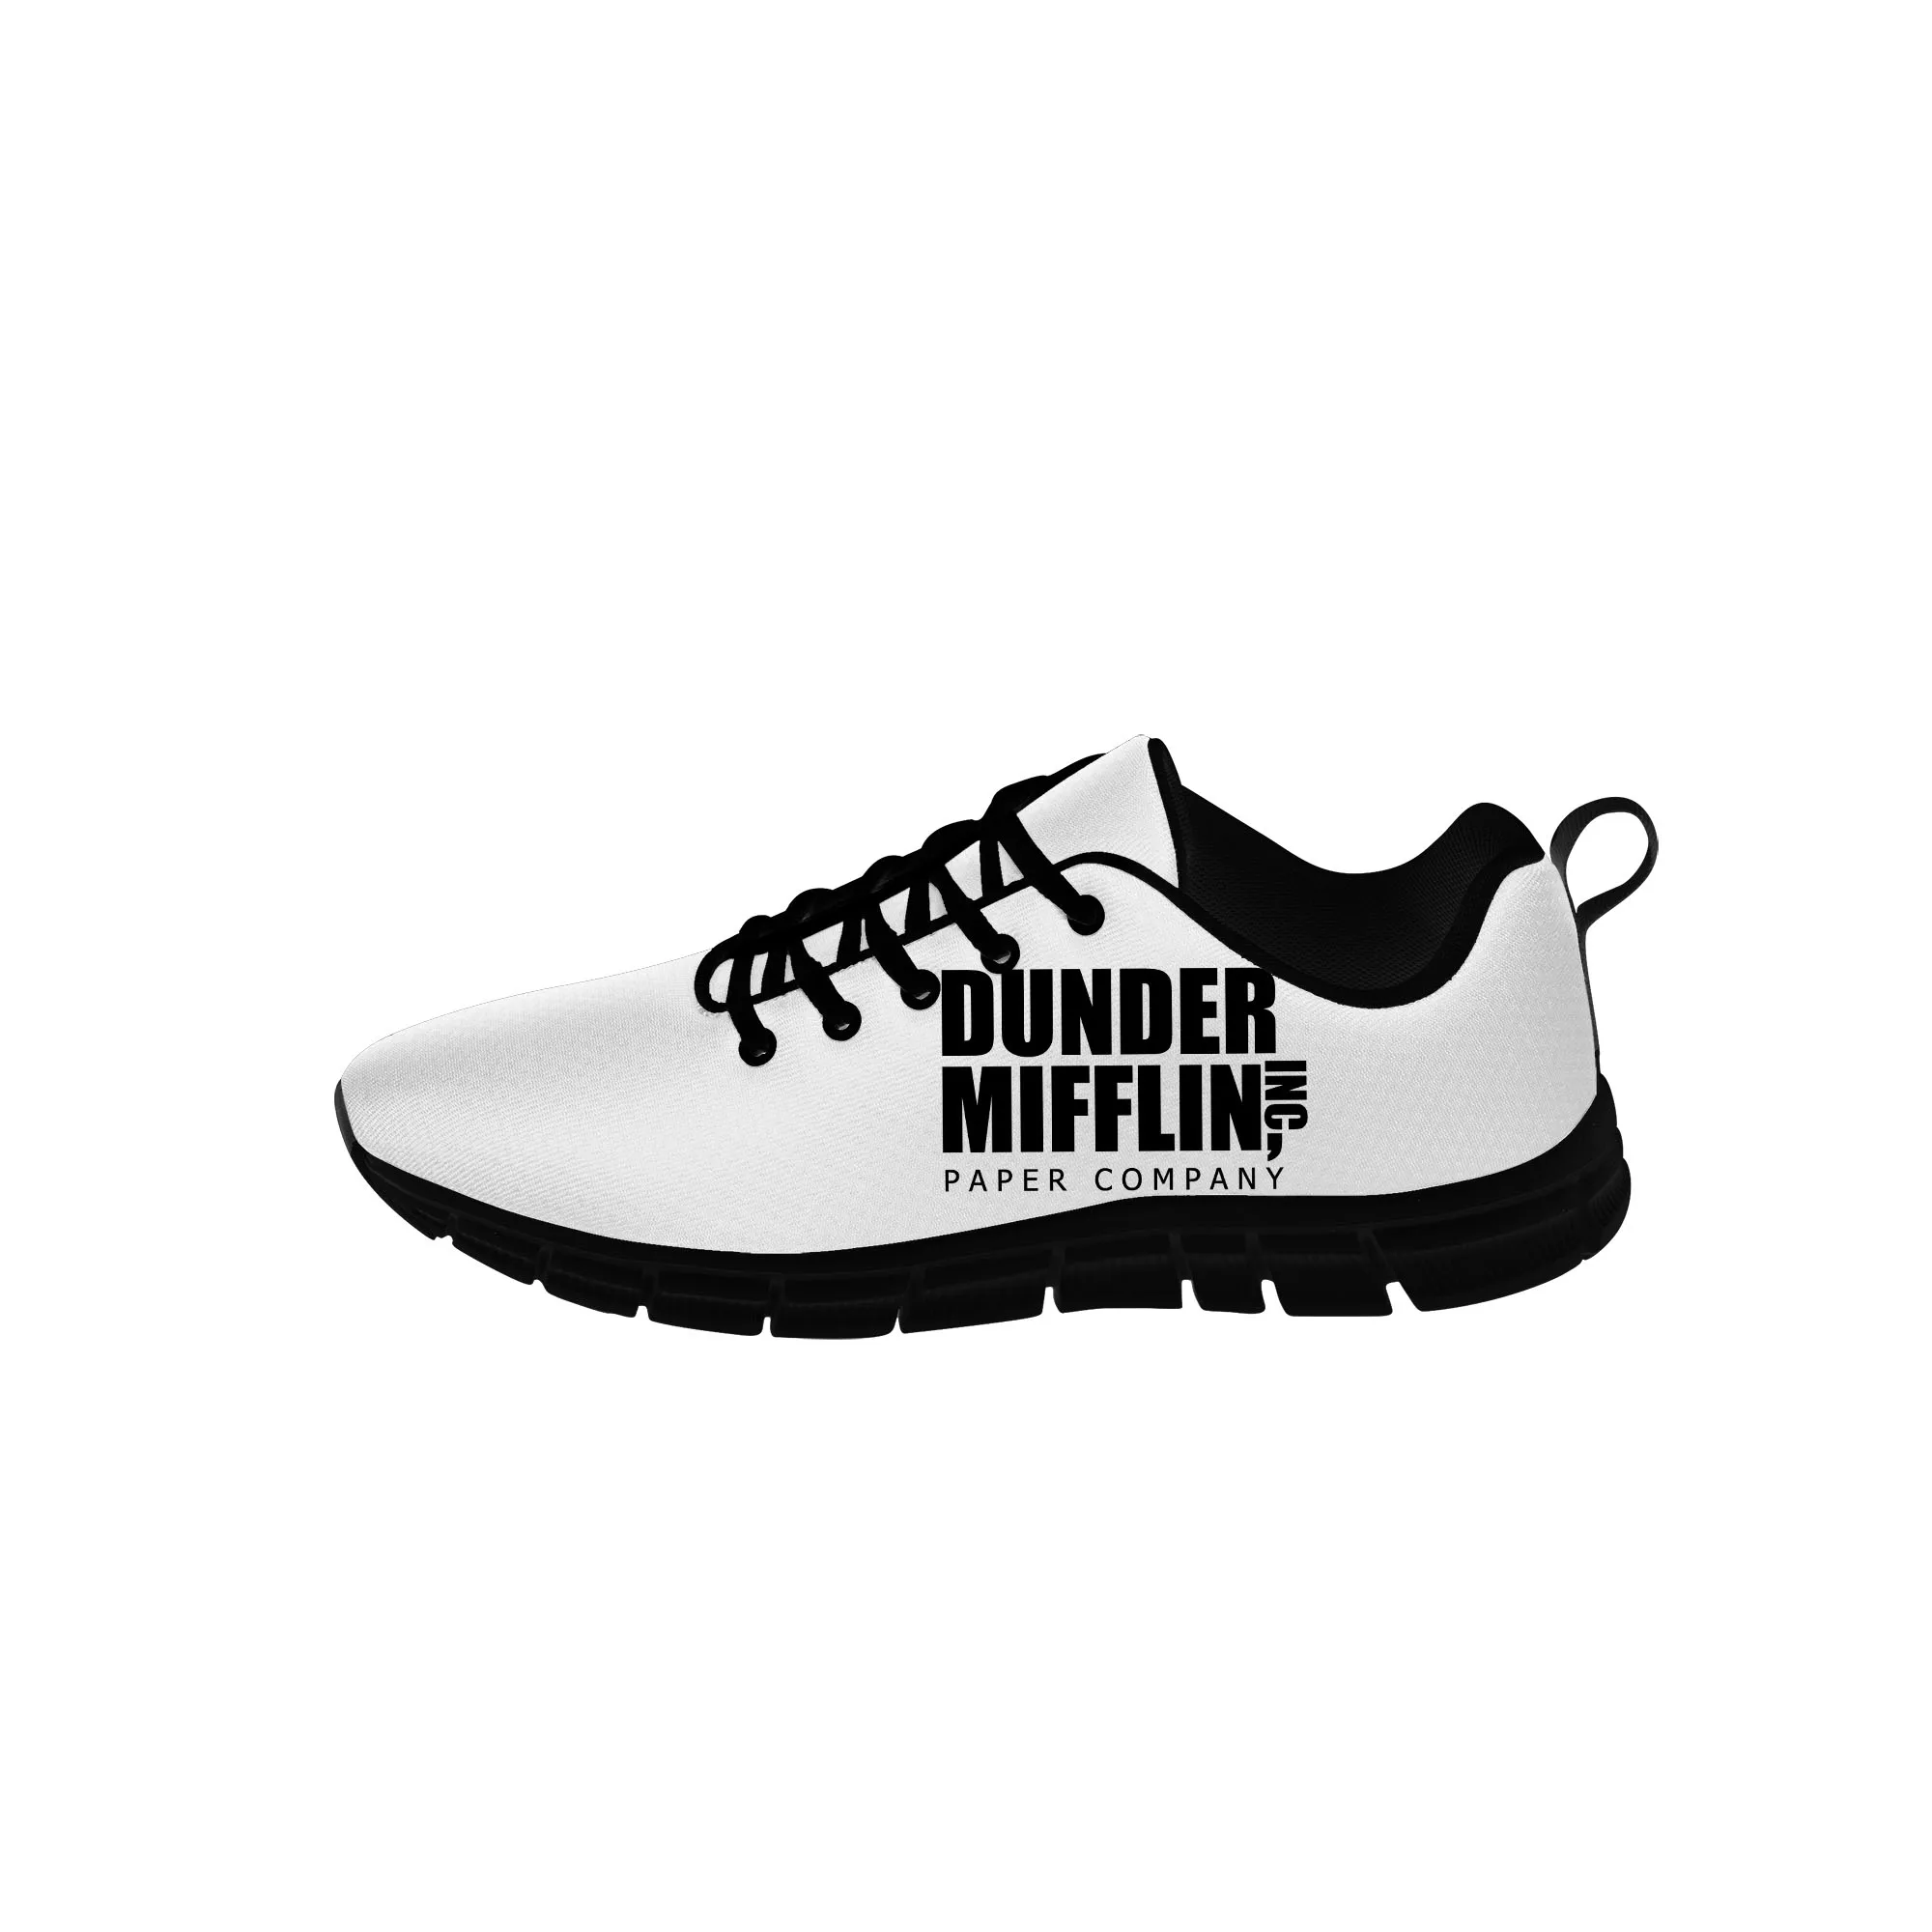 

The Office TV Show Sneakers Mens Womens Teenager Dunder Mifflin Paper Casual Cloth Shoes Canvas Shoe Cosplay Lightweight shoe